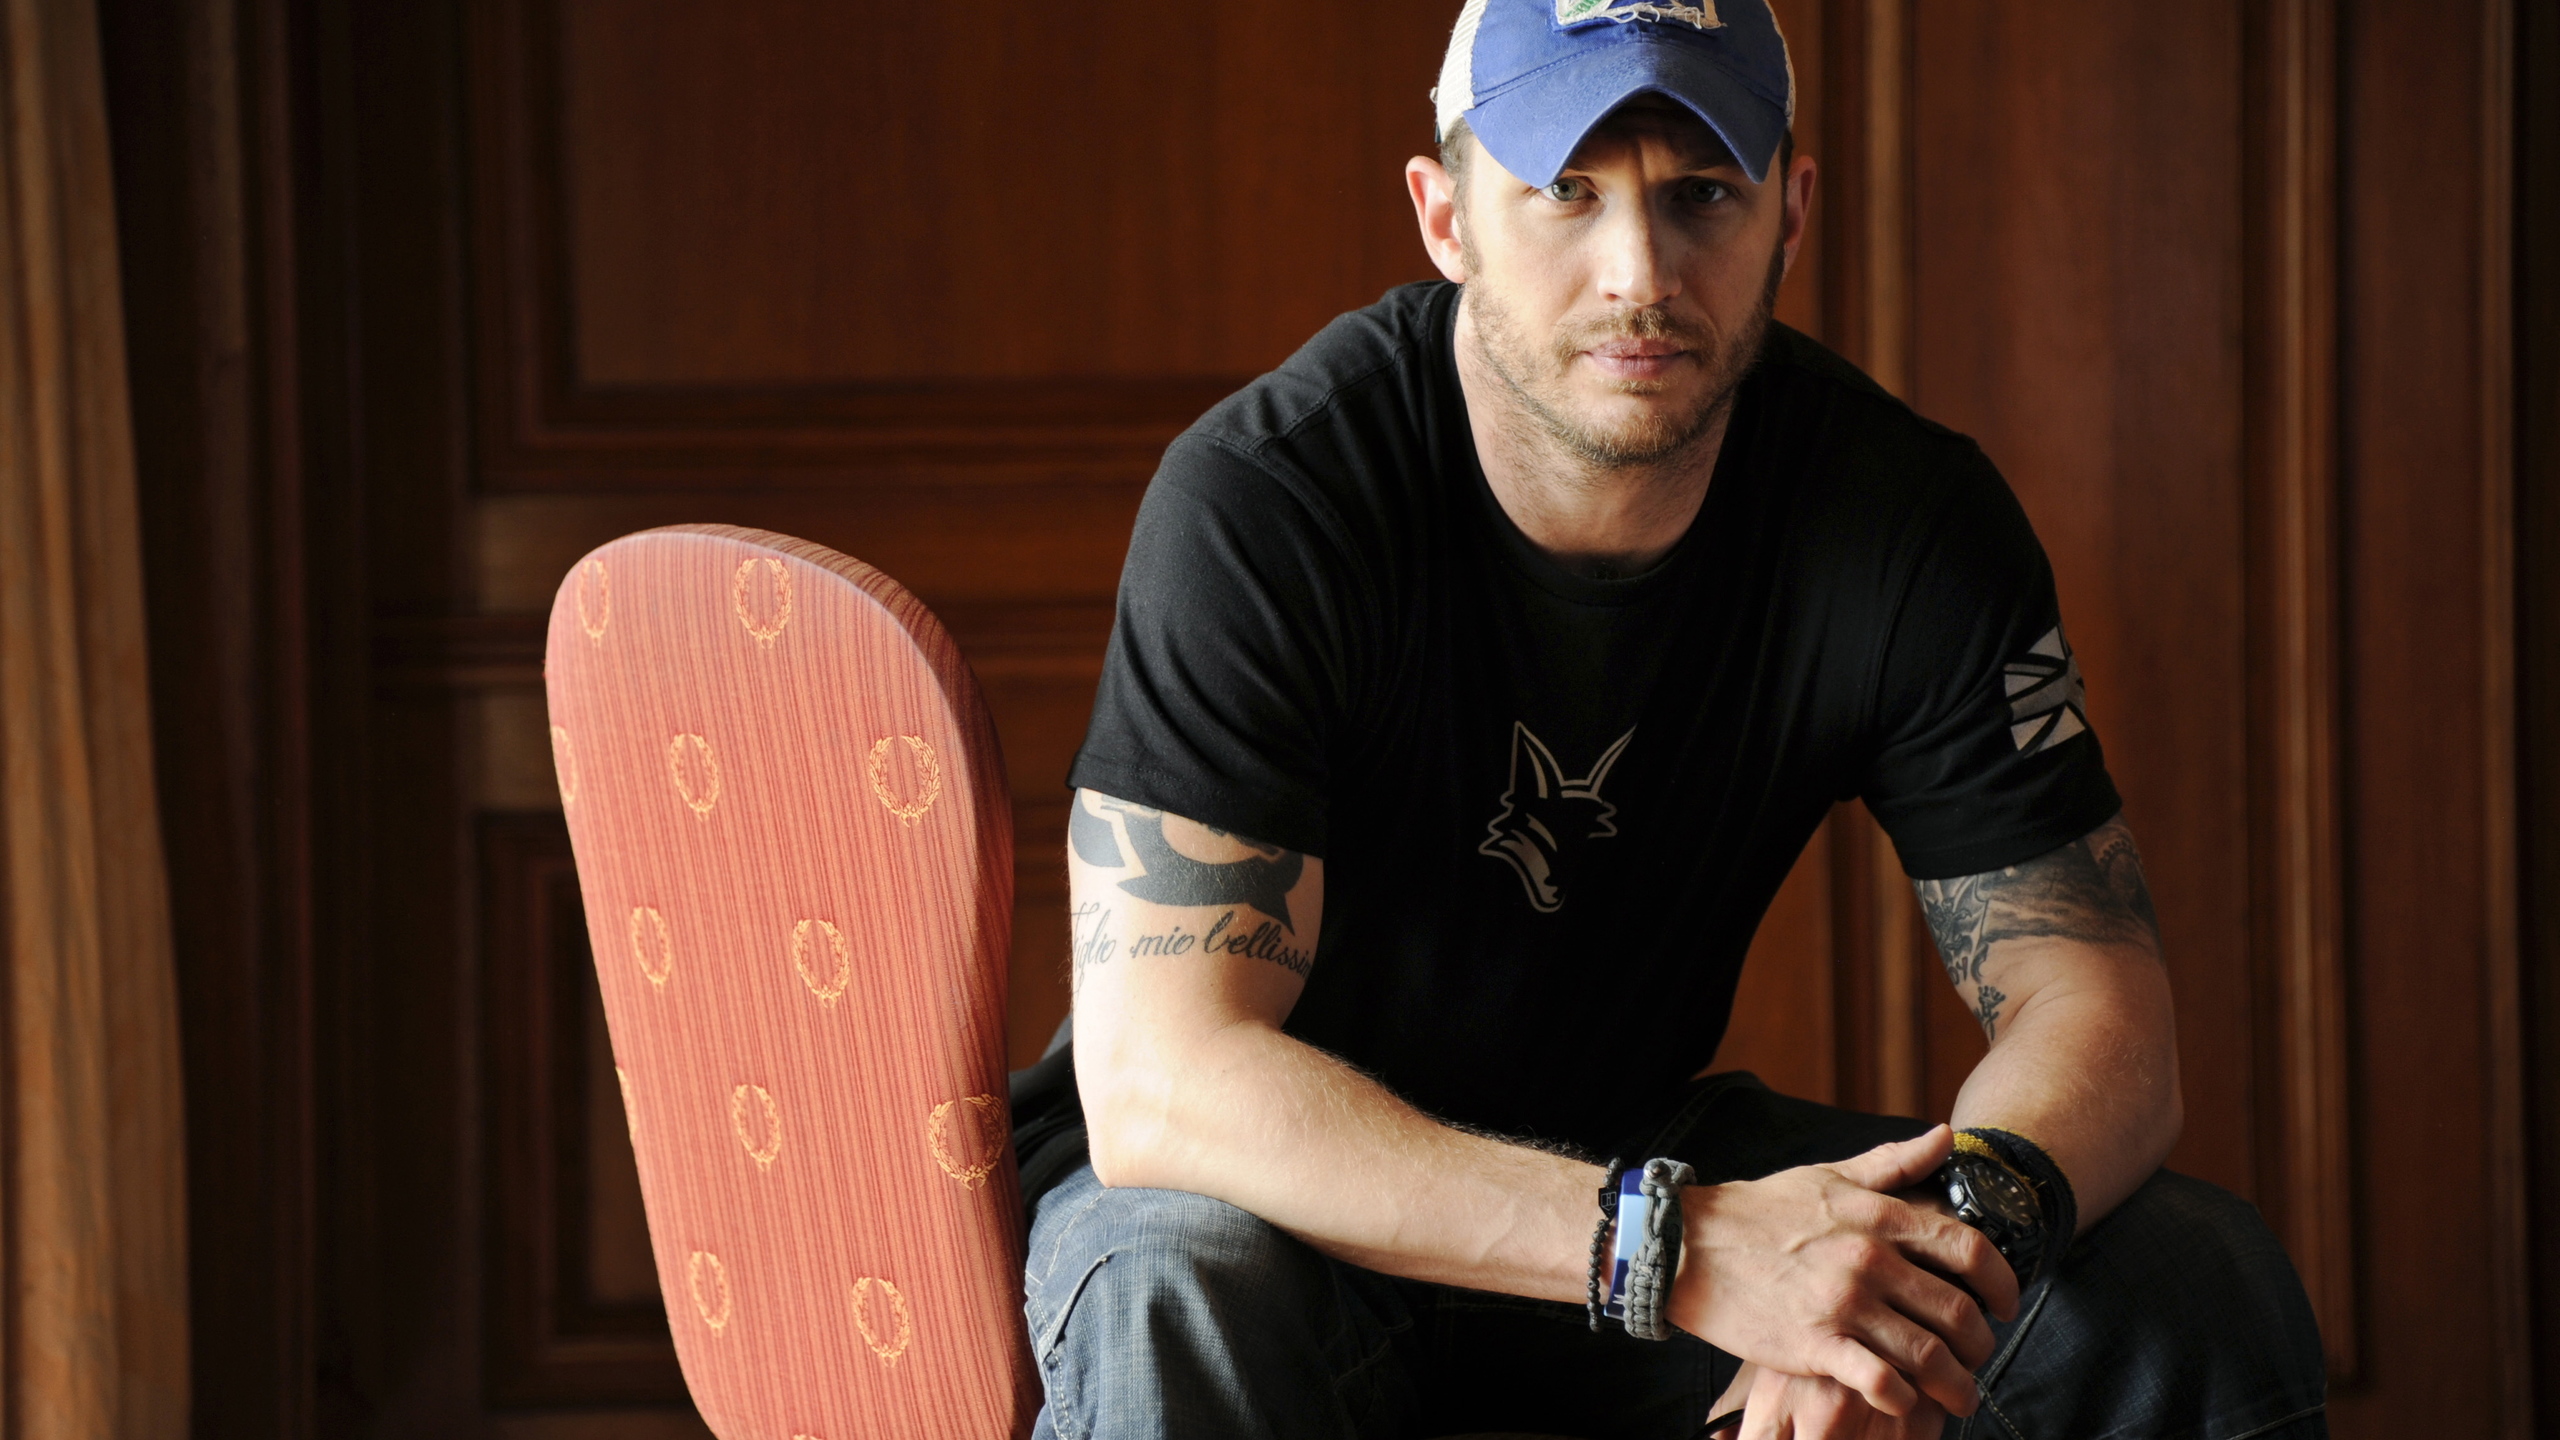 Tom Hardy Celebrity Tattoo Black T Shirt Indoors Sitting Looking At Viewer 2560x1440